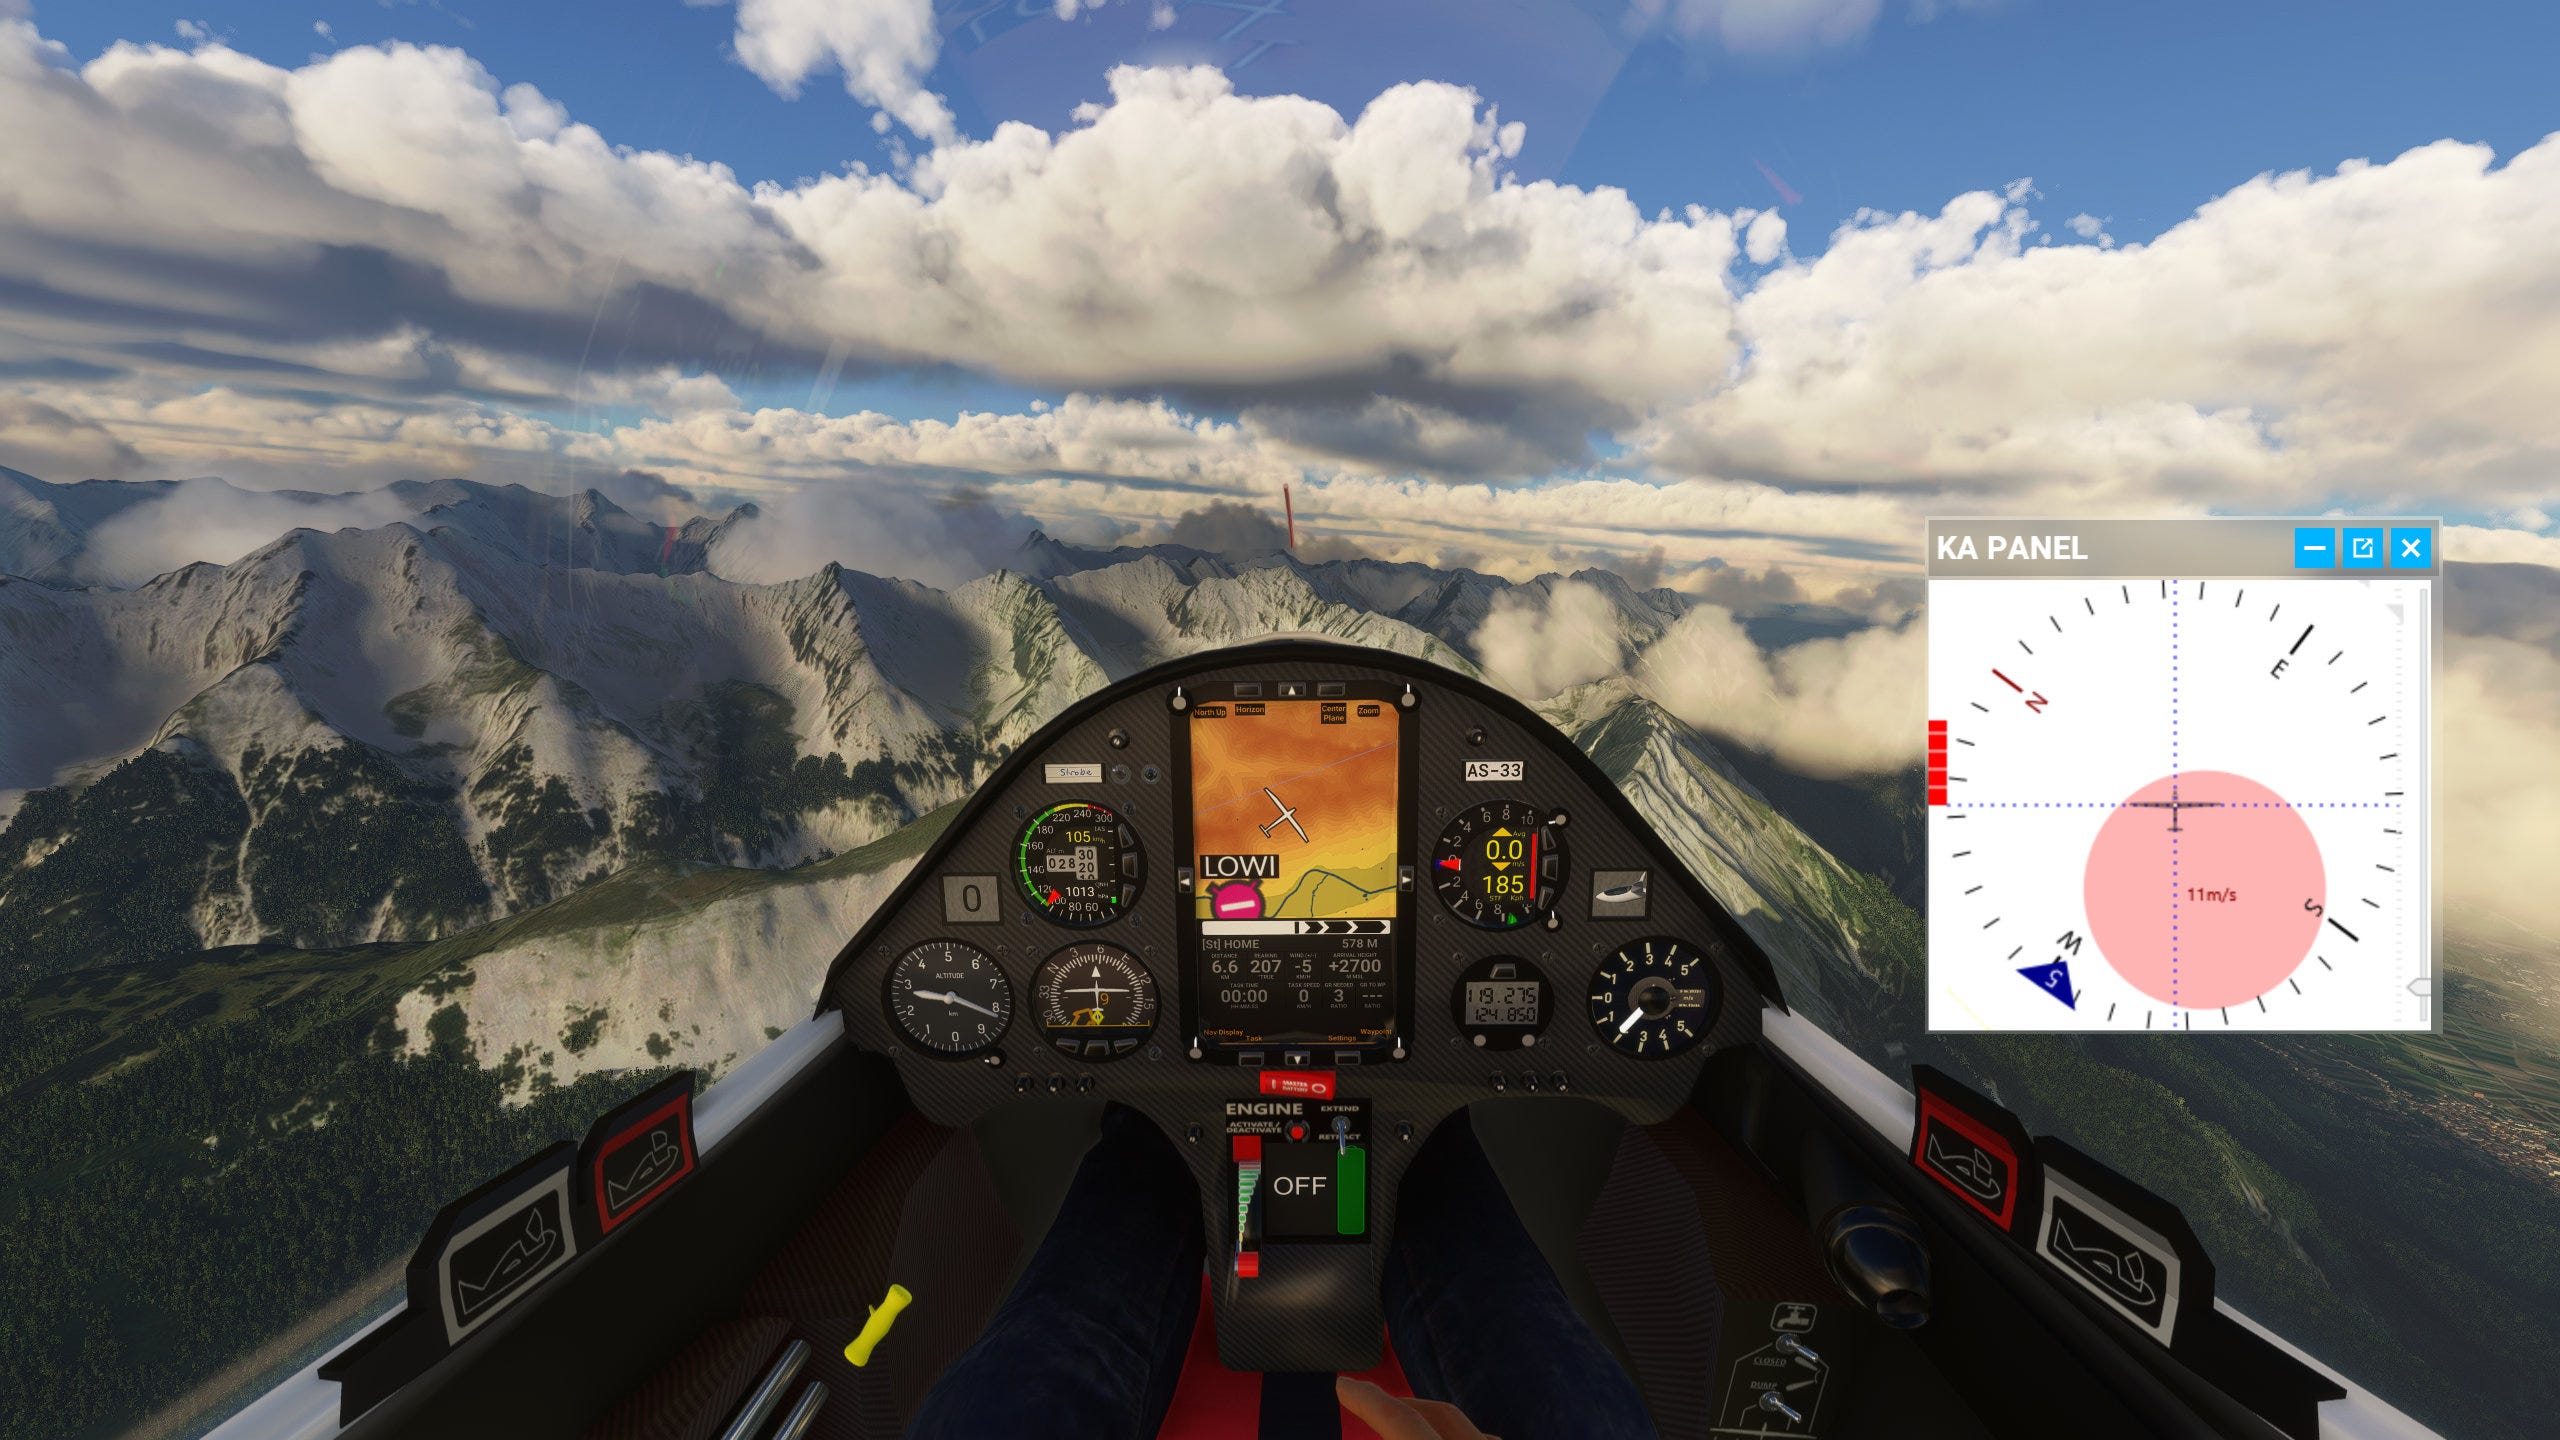 The 8 Best Microsoft Flight Simulator Third Party Planes (May 2022)